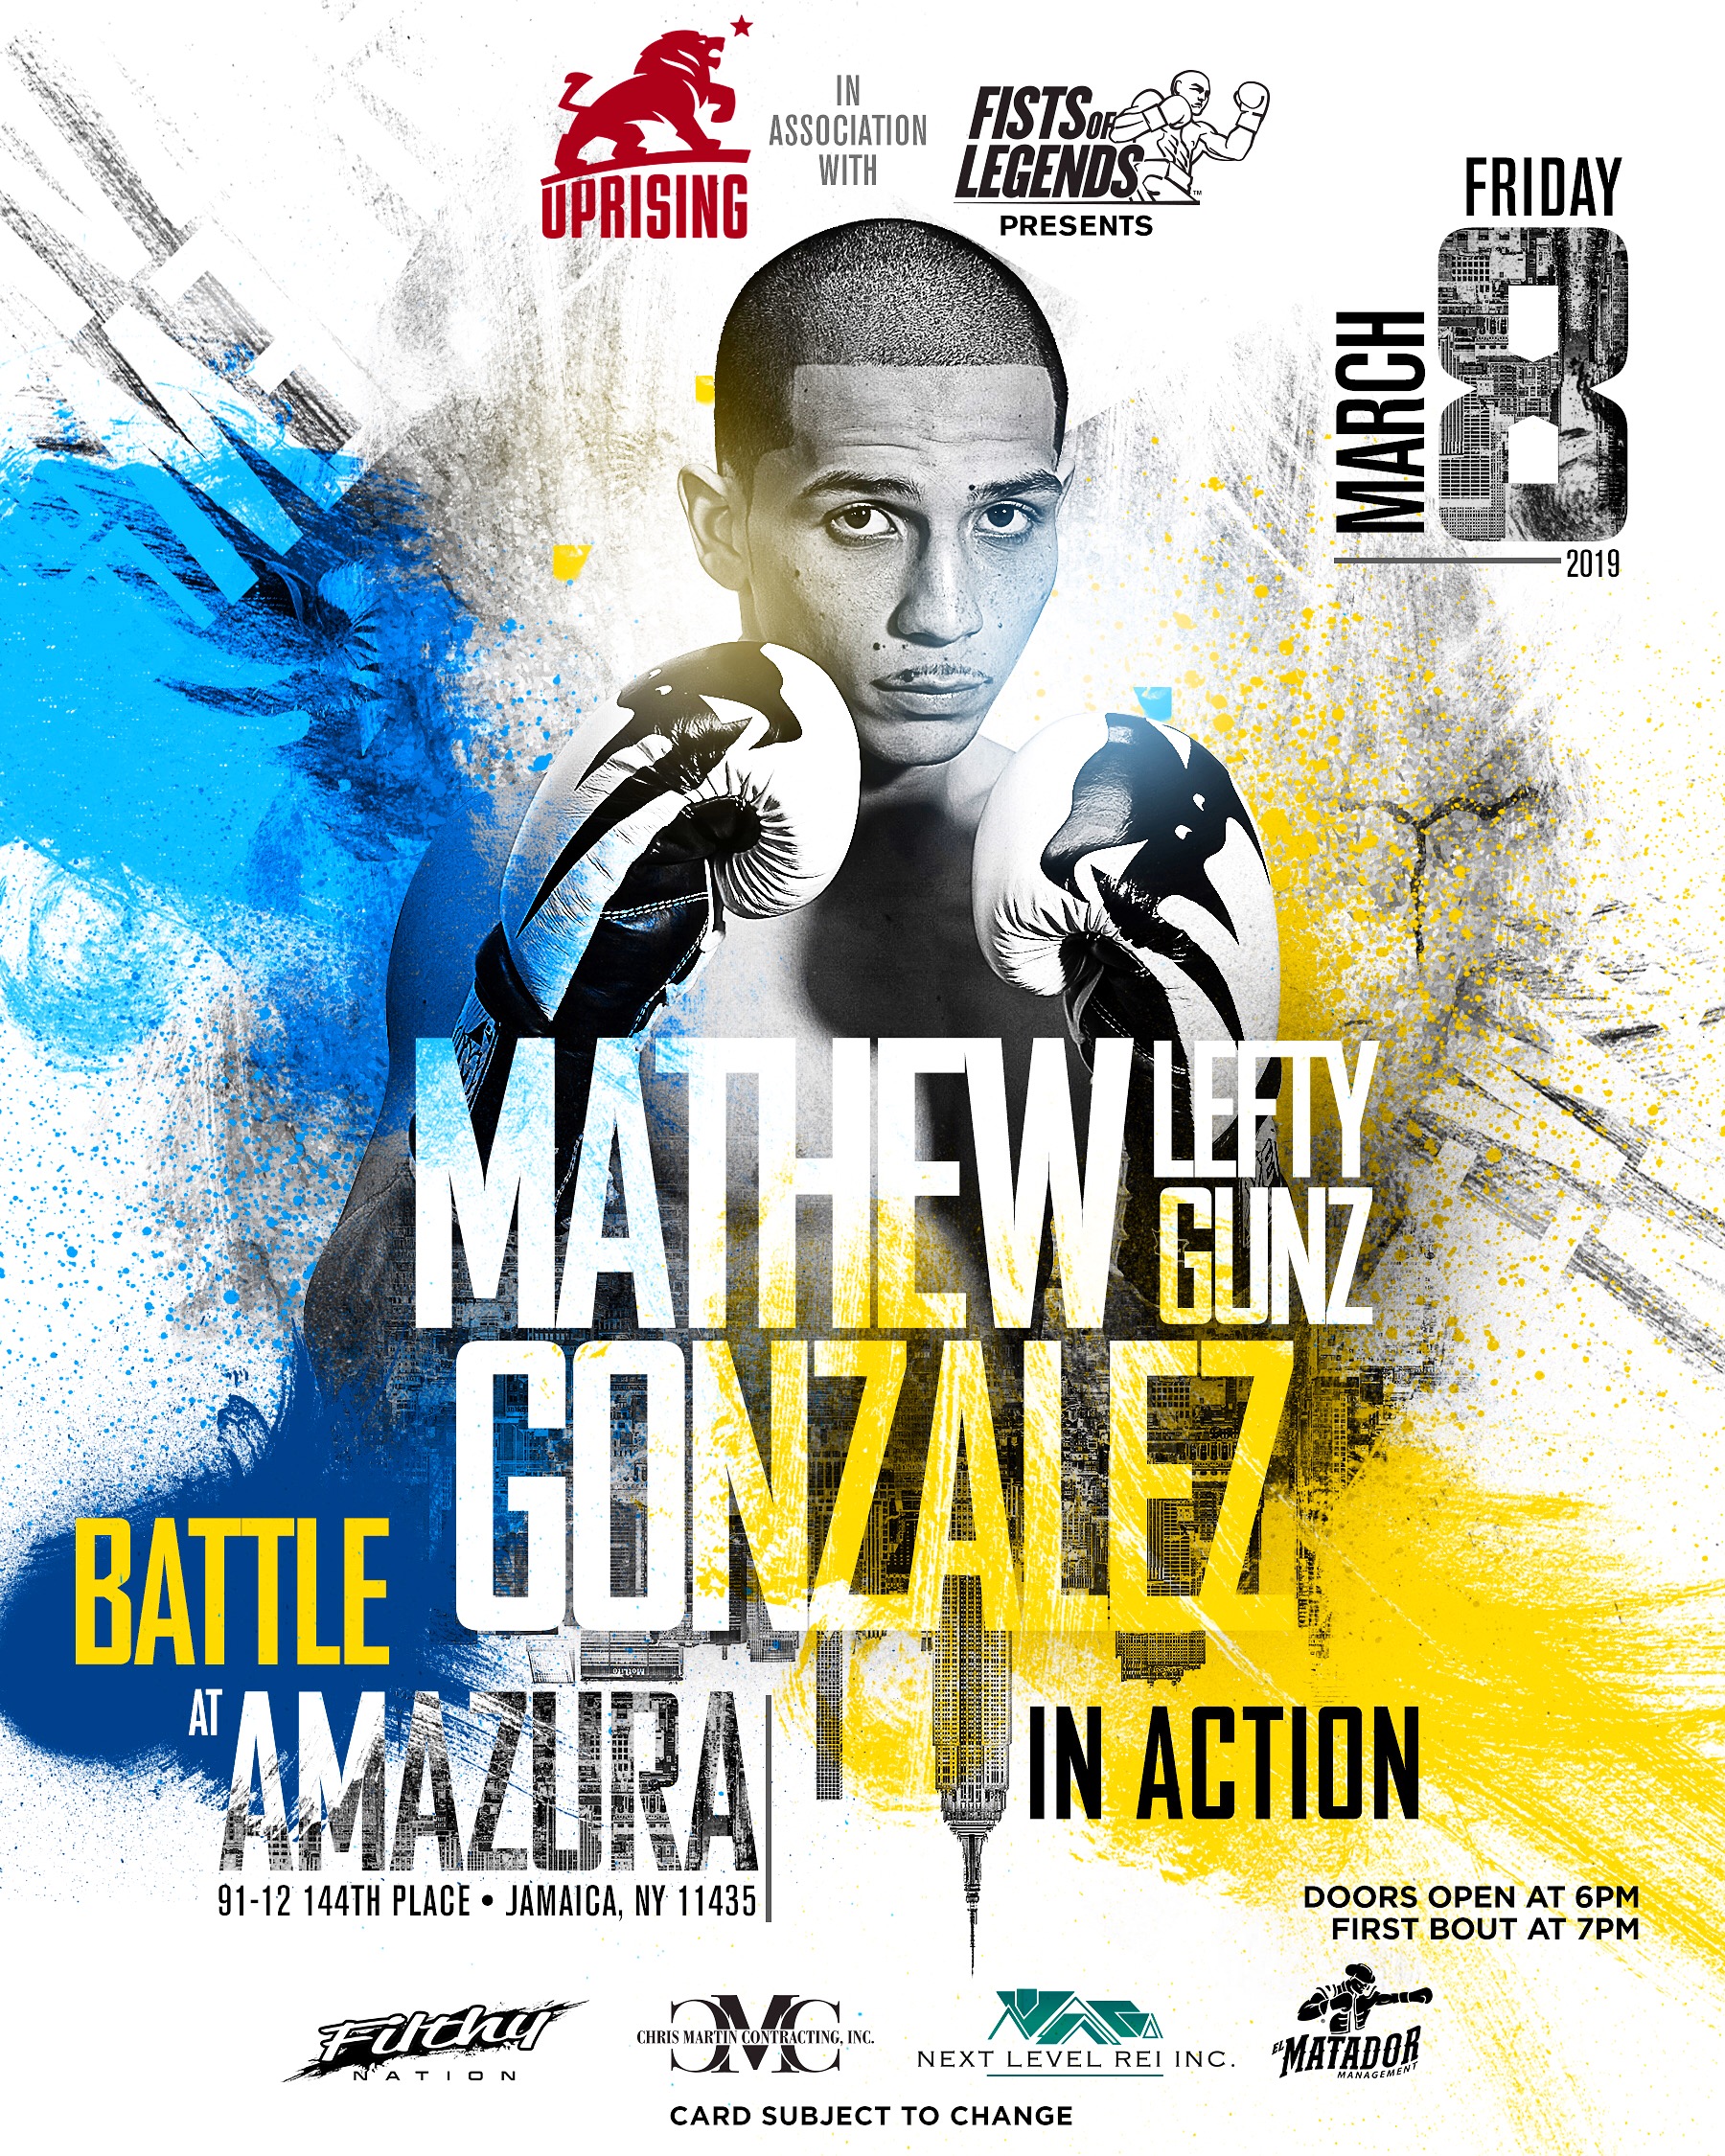 Mathew “Lefty Gunz” Gonzalez returns to the ring on March 8th